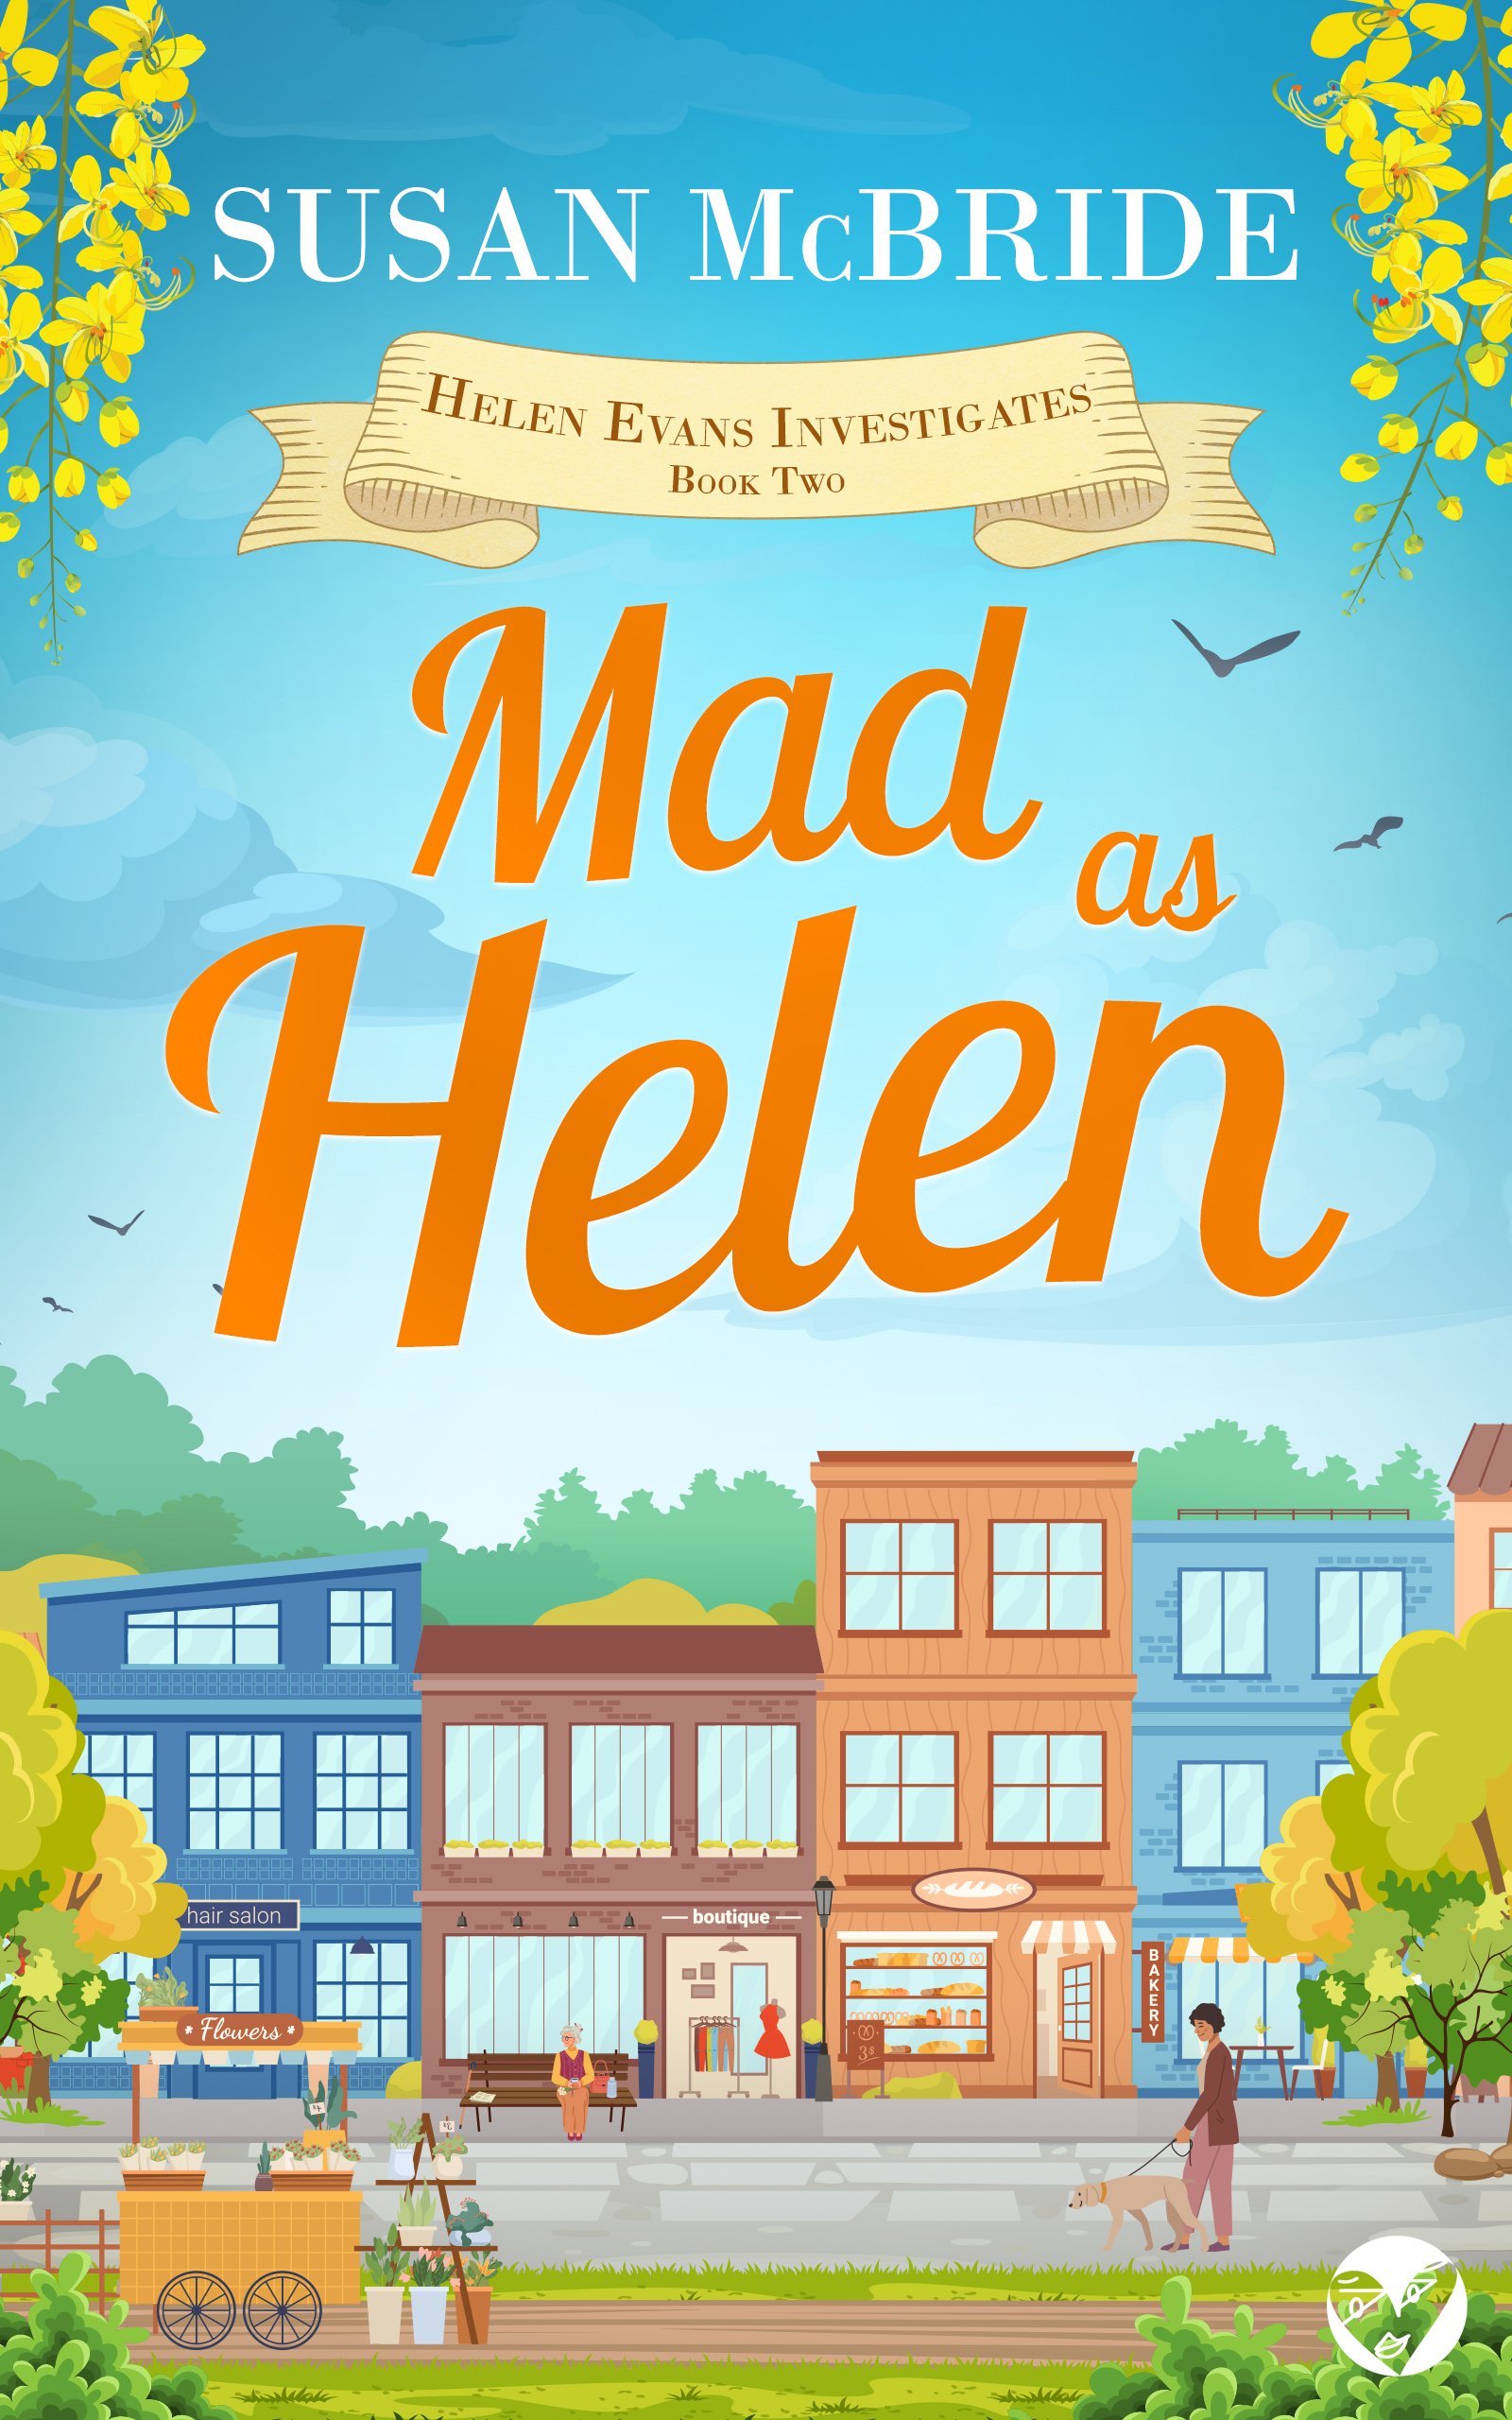 MAD AS HELEN cover publish.jpg